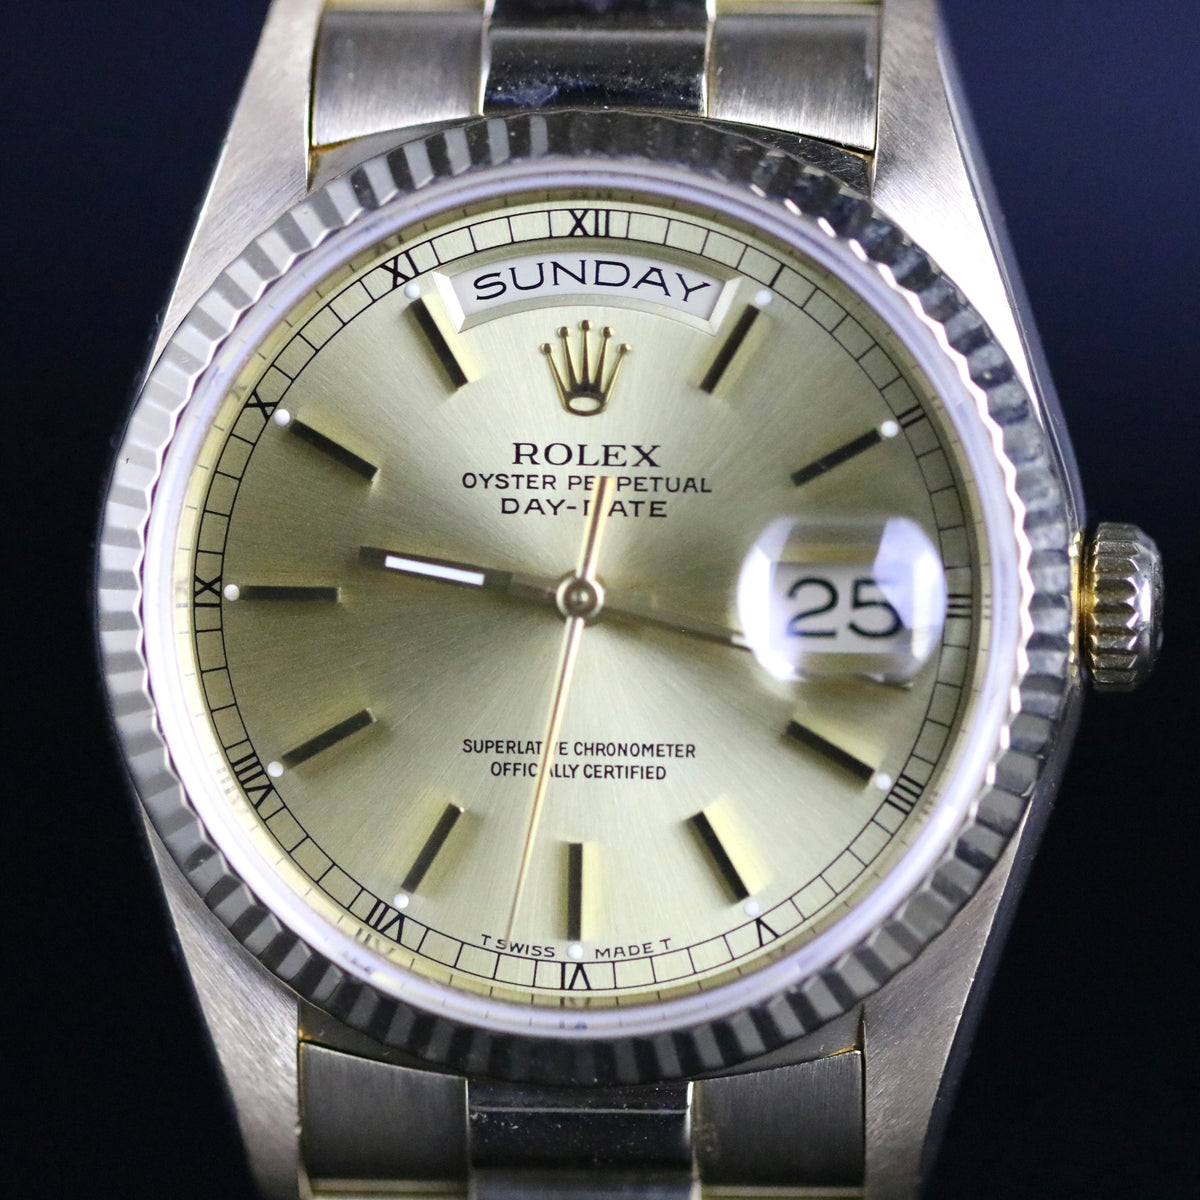 1989 Rolex 18238 Daydate 36mm with Box & Papers